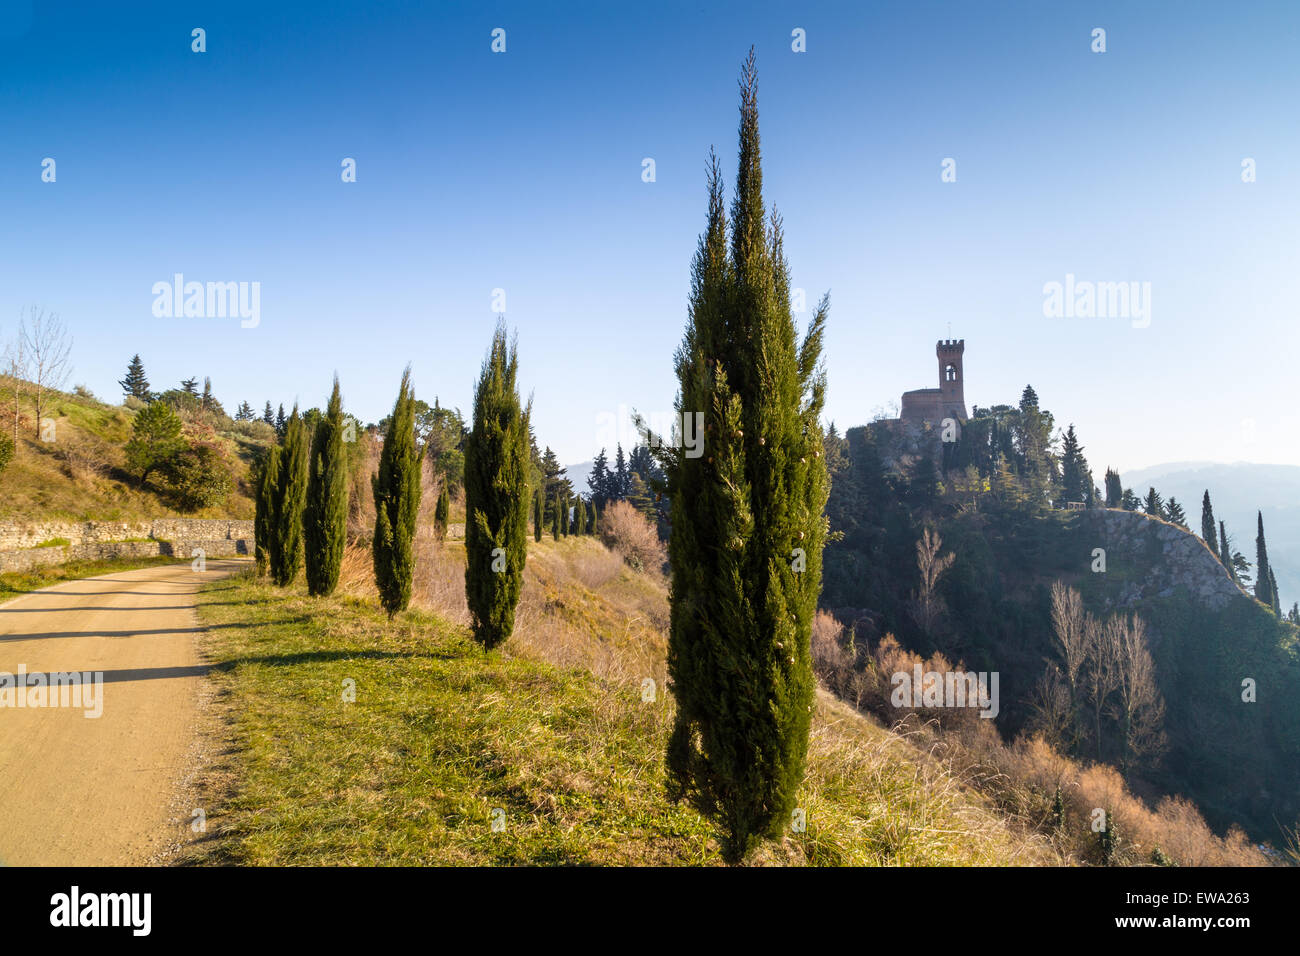 A road with cypresses trees leads to a medieval clock tower on misty hills in a countryside of bushes and cypress trees in a winter sunny day in Italy Stock Photo